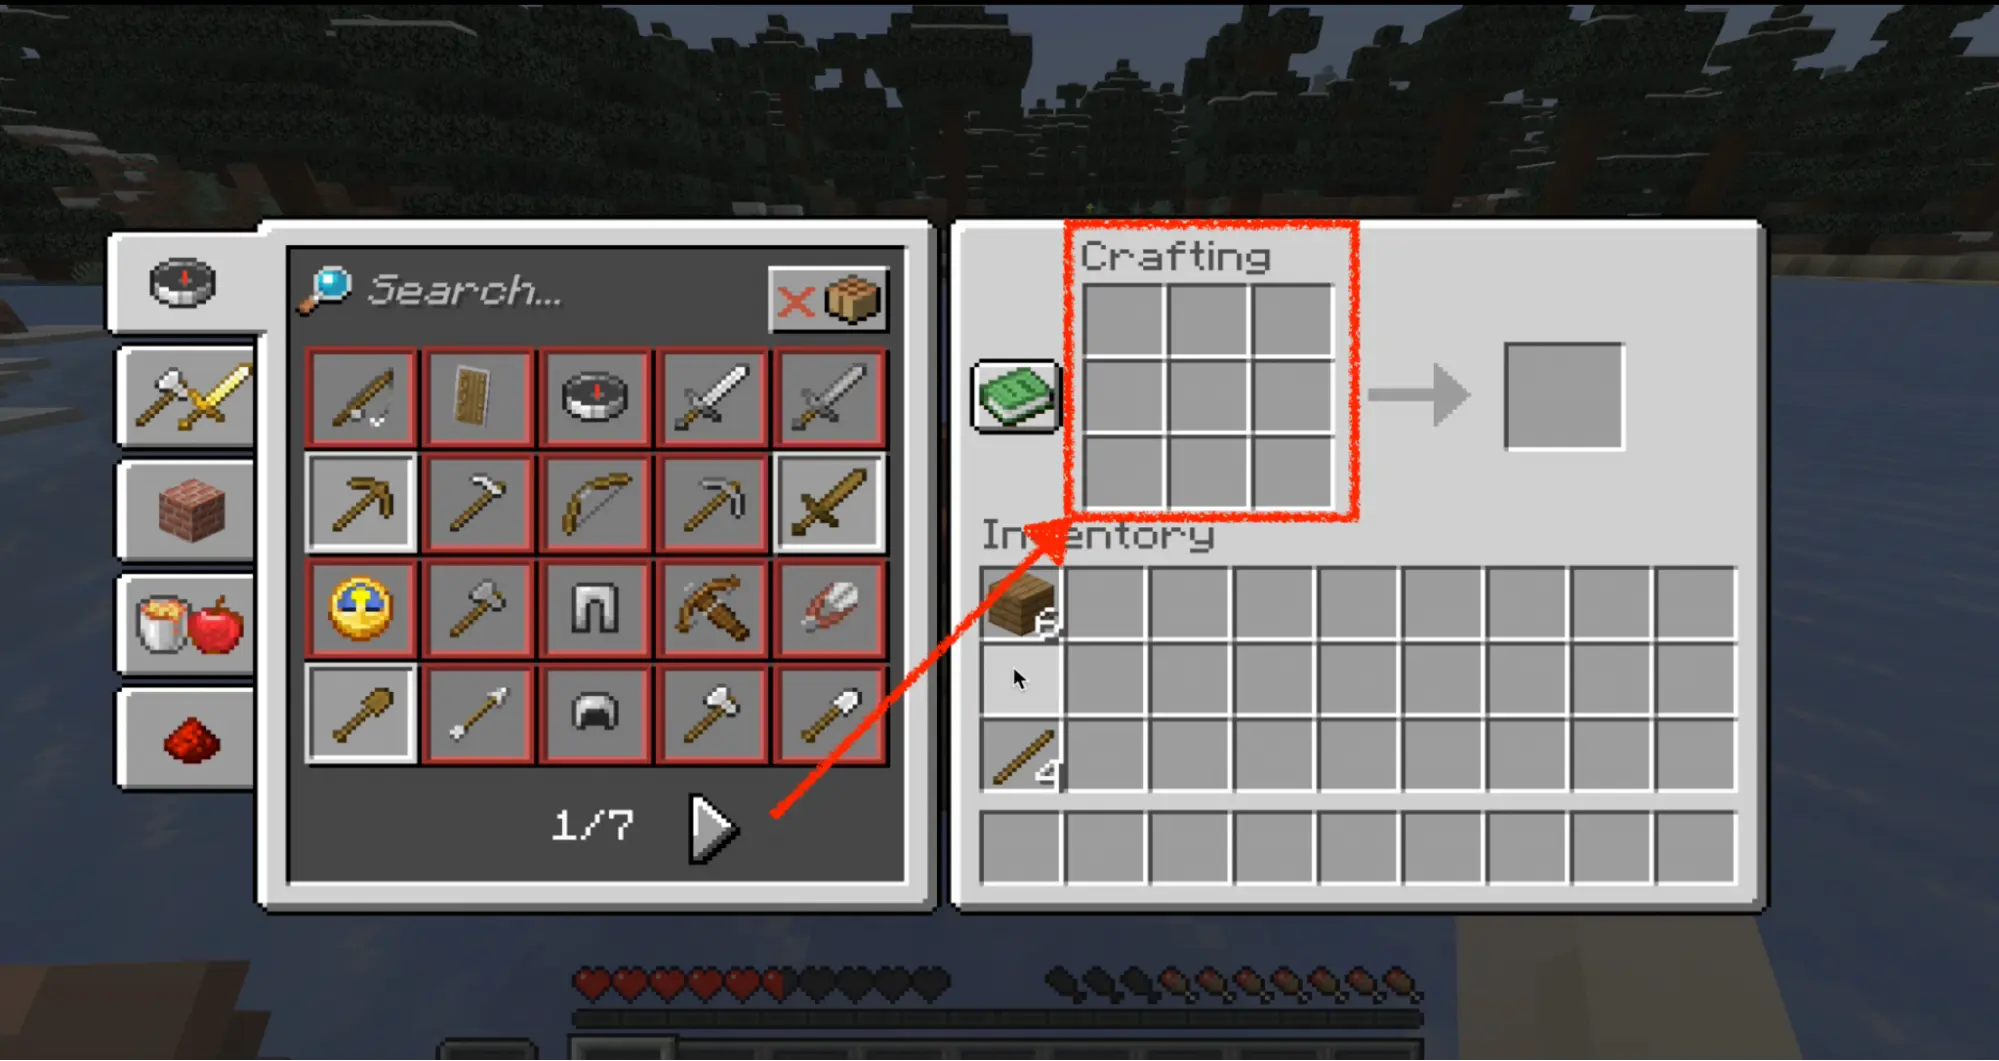 open the crafting menu